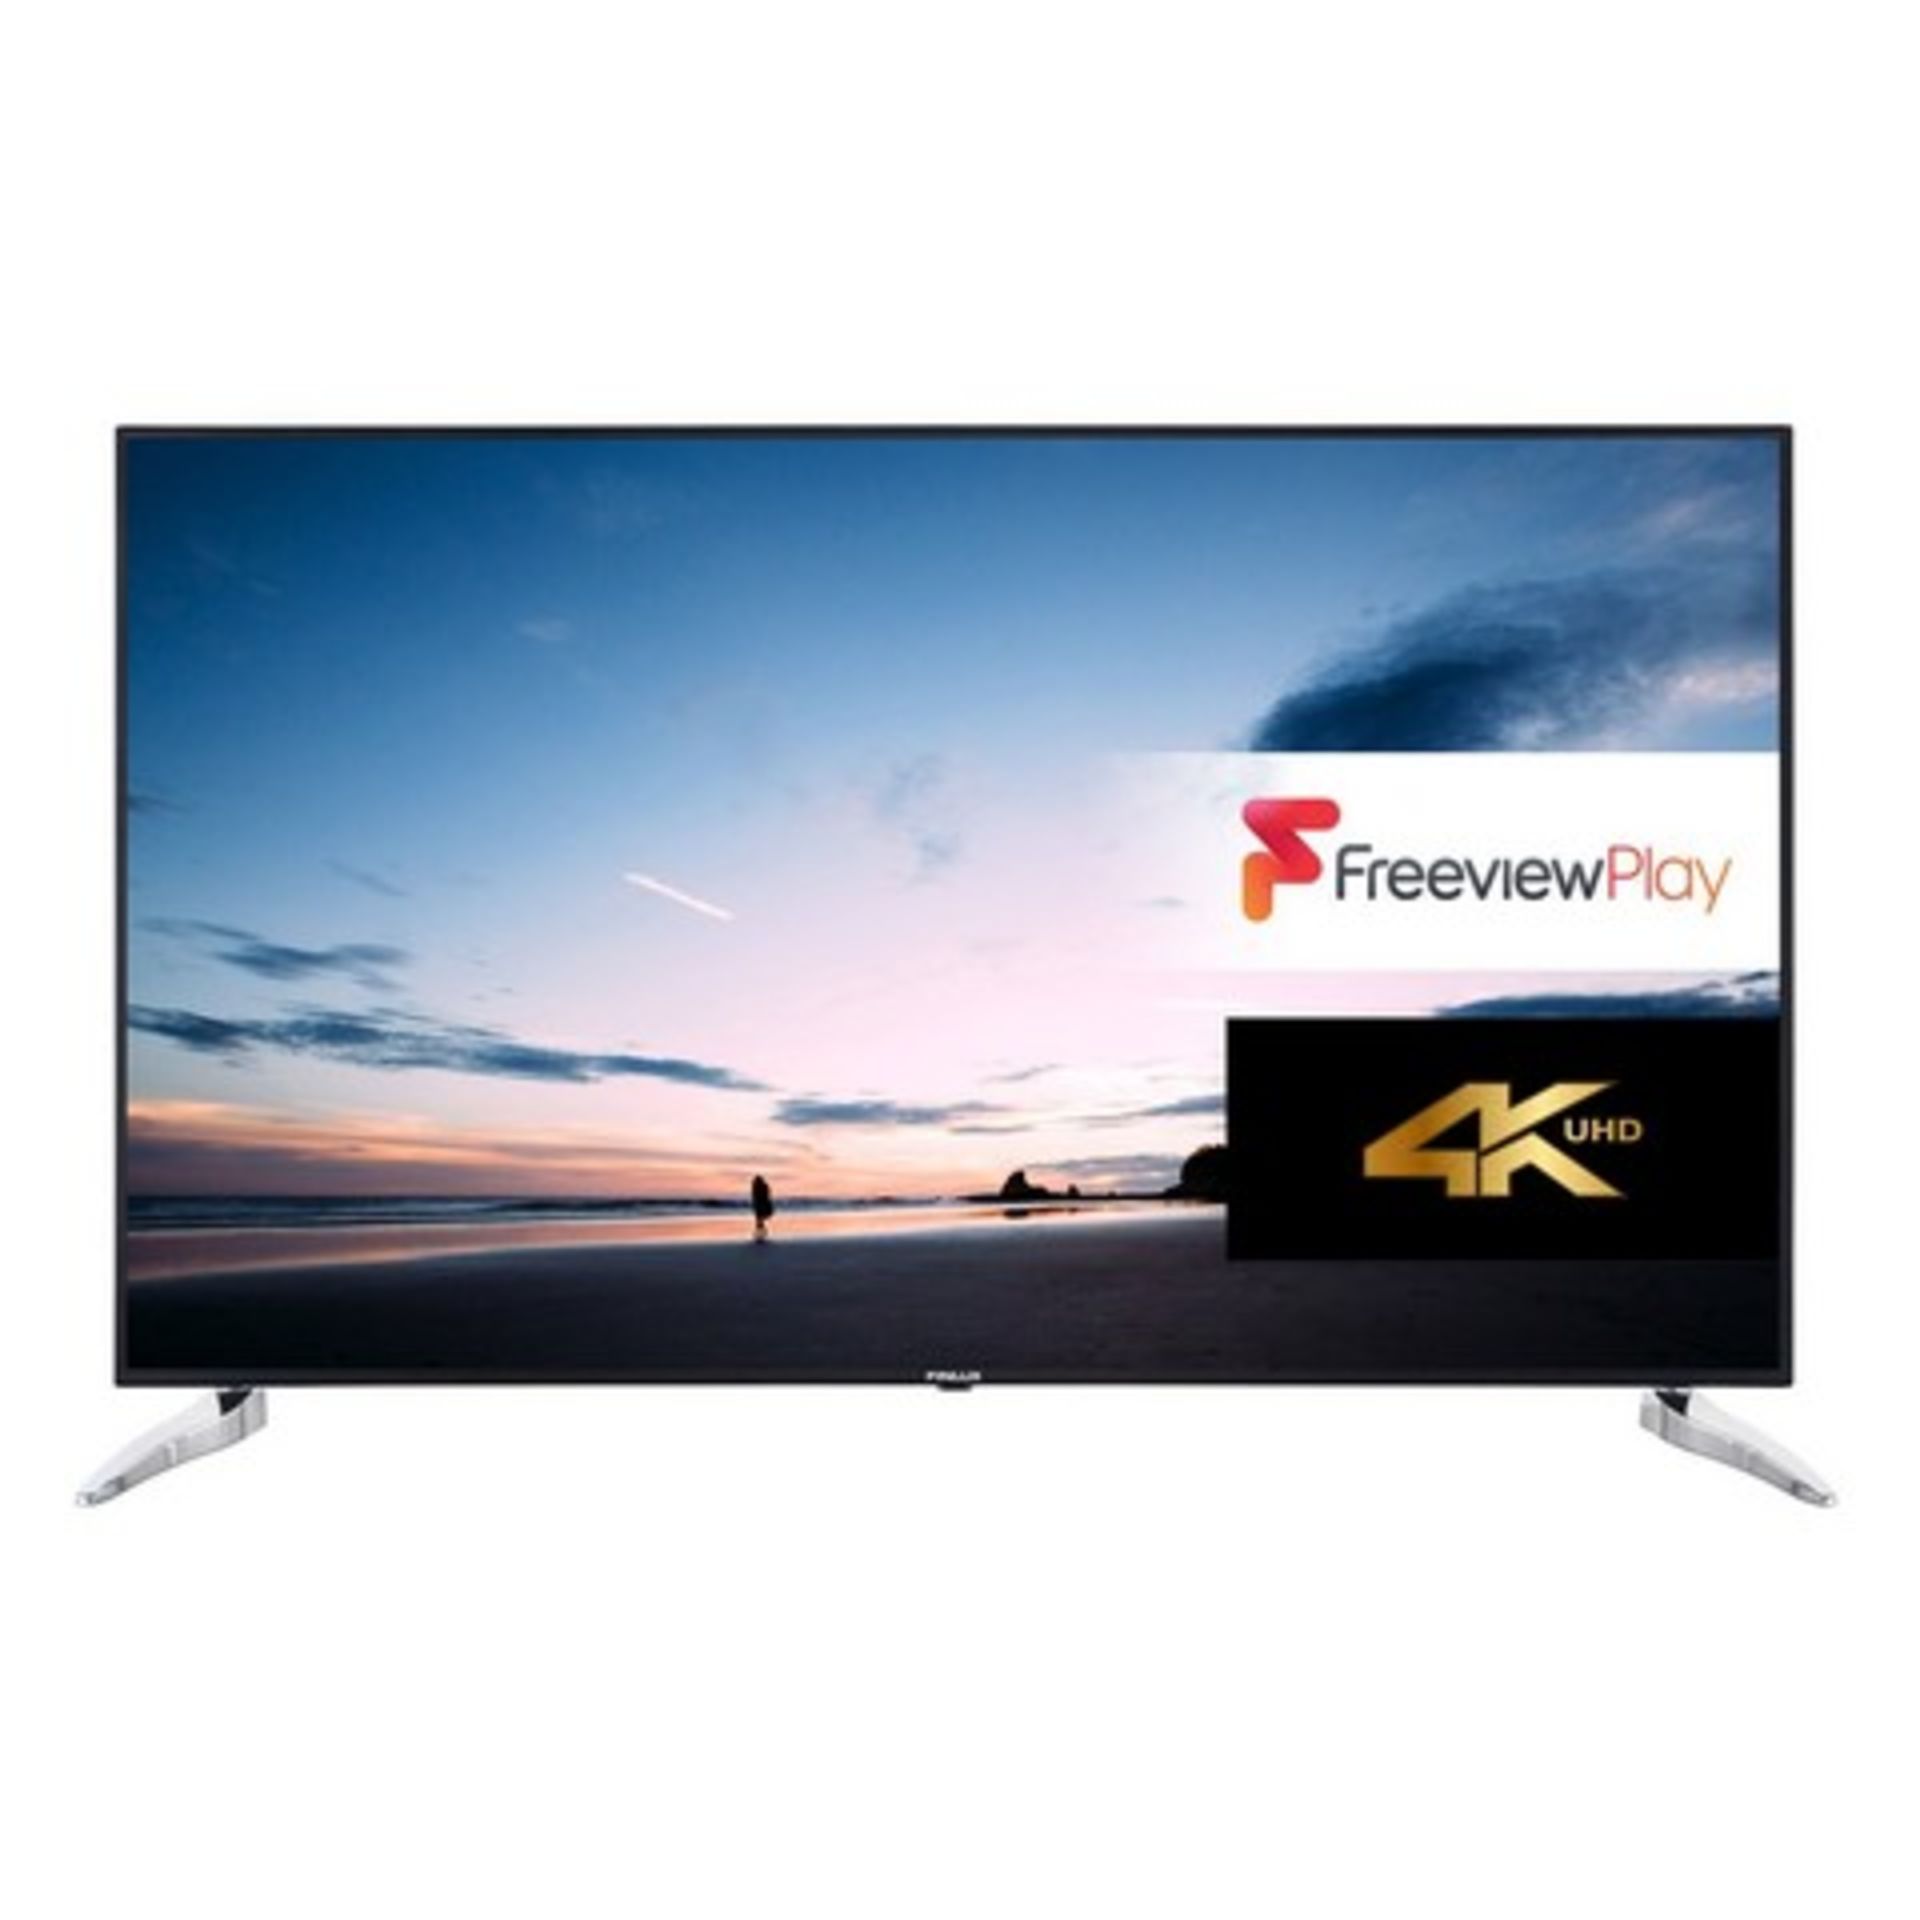 V Brand New 65" Finlux 4K Ultra HD Smart TV With Freeview Play And Built In WiFi - Youtube 4K -